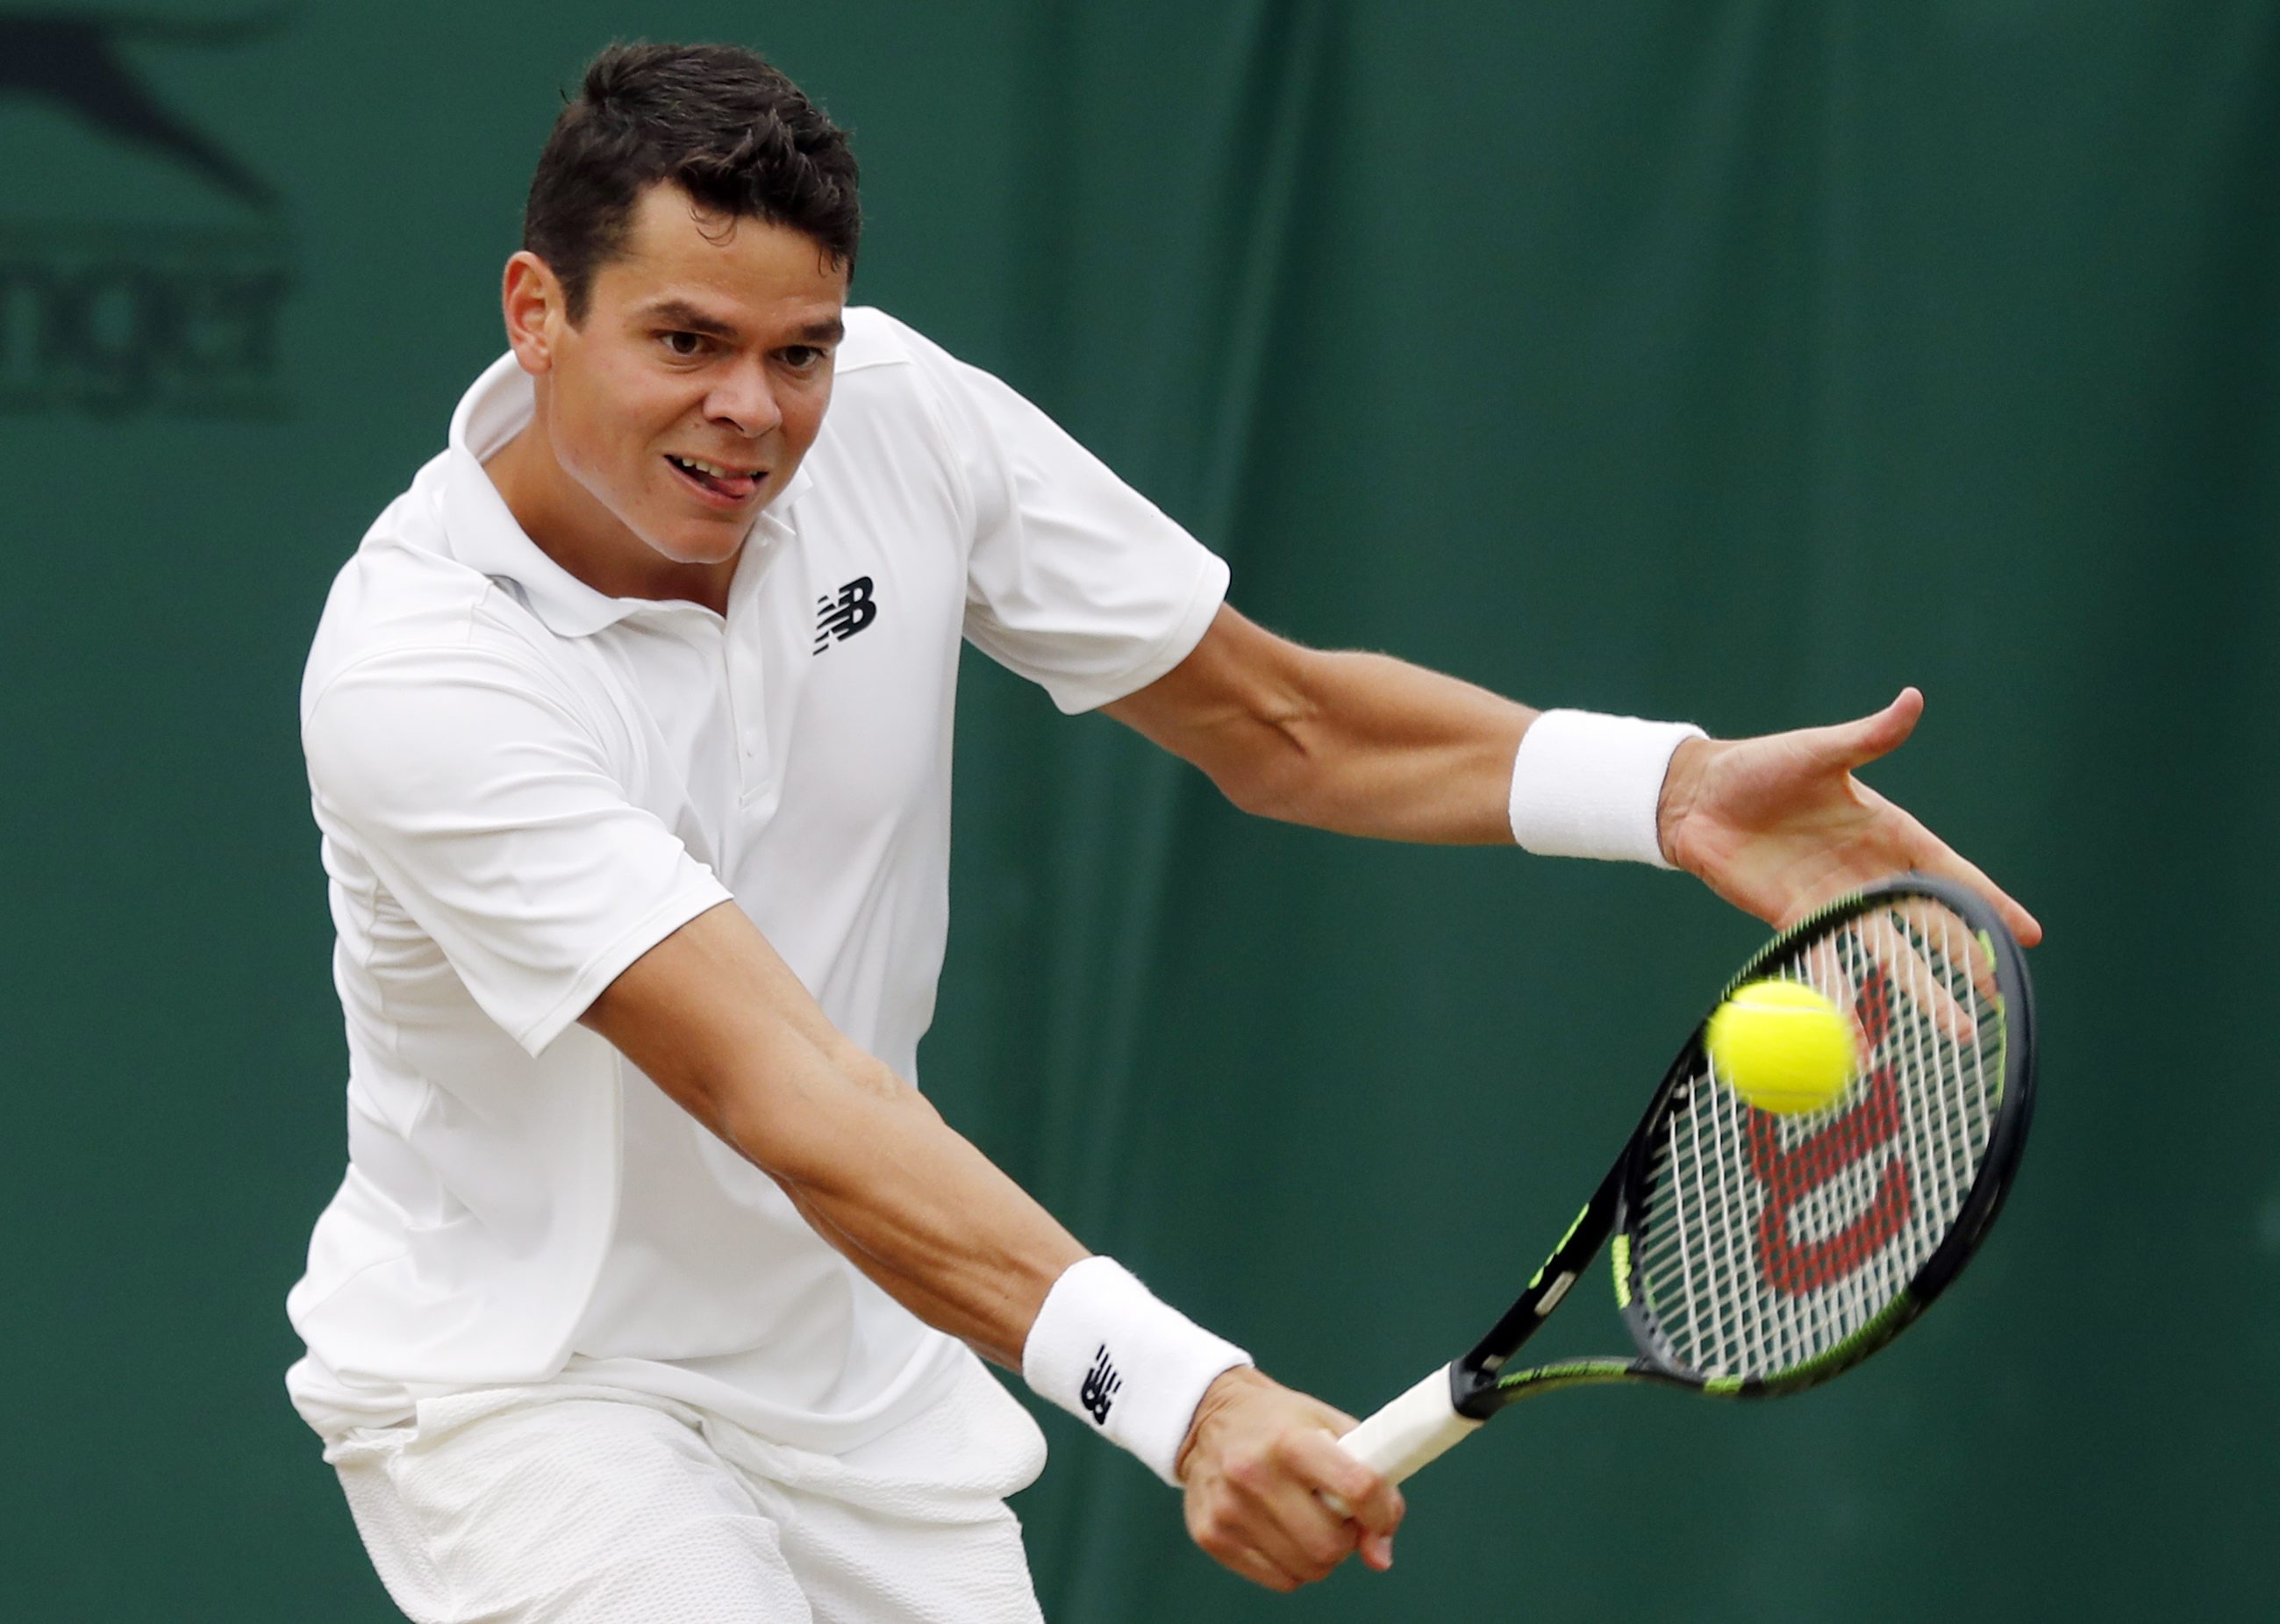 Milos Raonic of Canada returns to David Goffin of Belgium during their men's singles match on day eight of the Wimbledon Tennis Championships in London, Monday, July 4, 2016. (AP Photo/Ben Curtis)